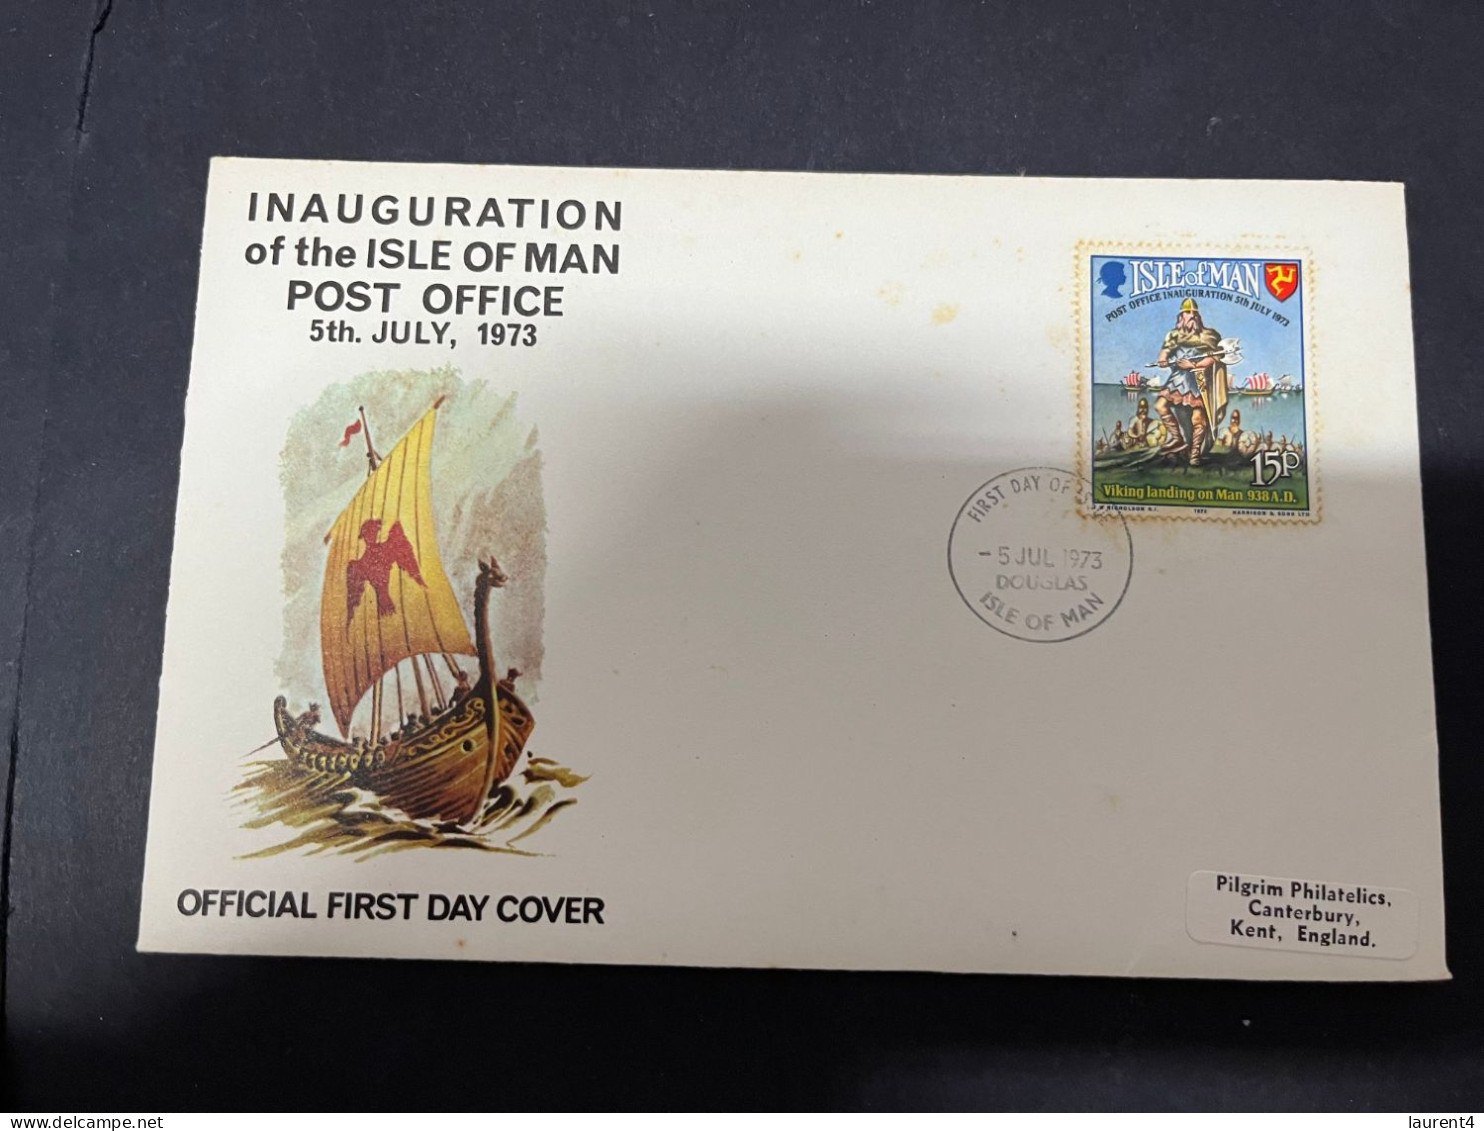 8-5-2024 (4 Z 29)  FDC (Isle Of Man) Europa 1973 - Post Office Inauguaration ( Some Rust ) (19 X 10,5 Cm) With Insert - Man (Insel)